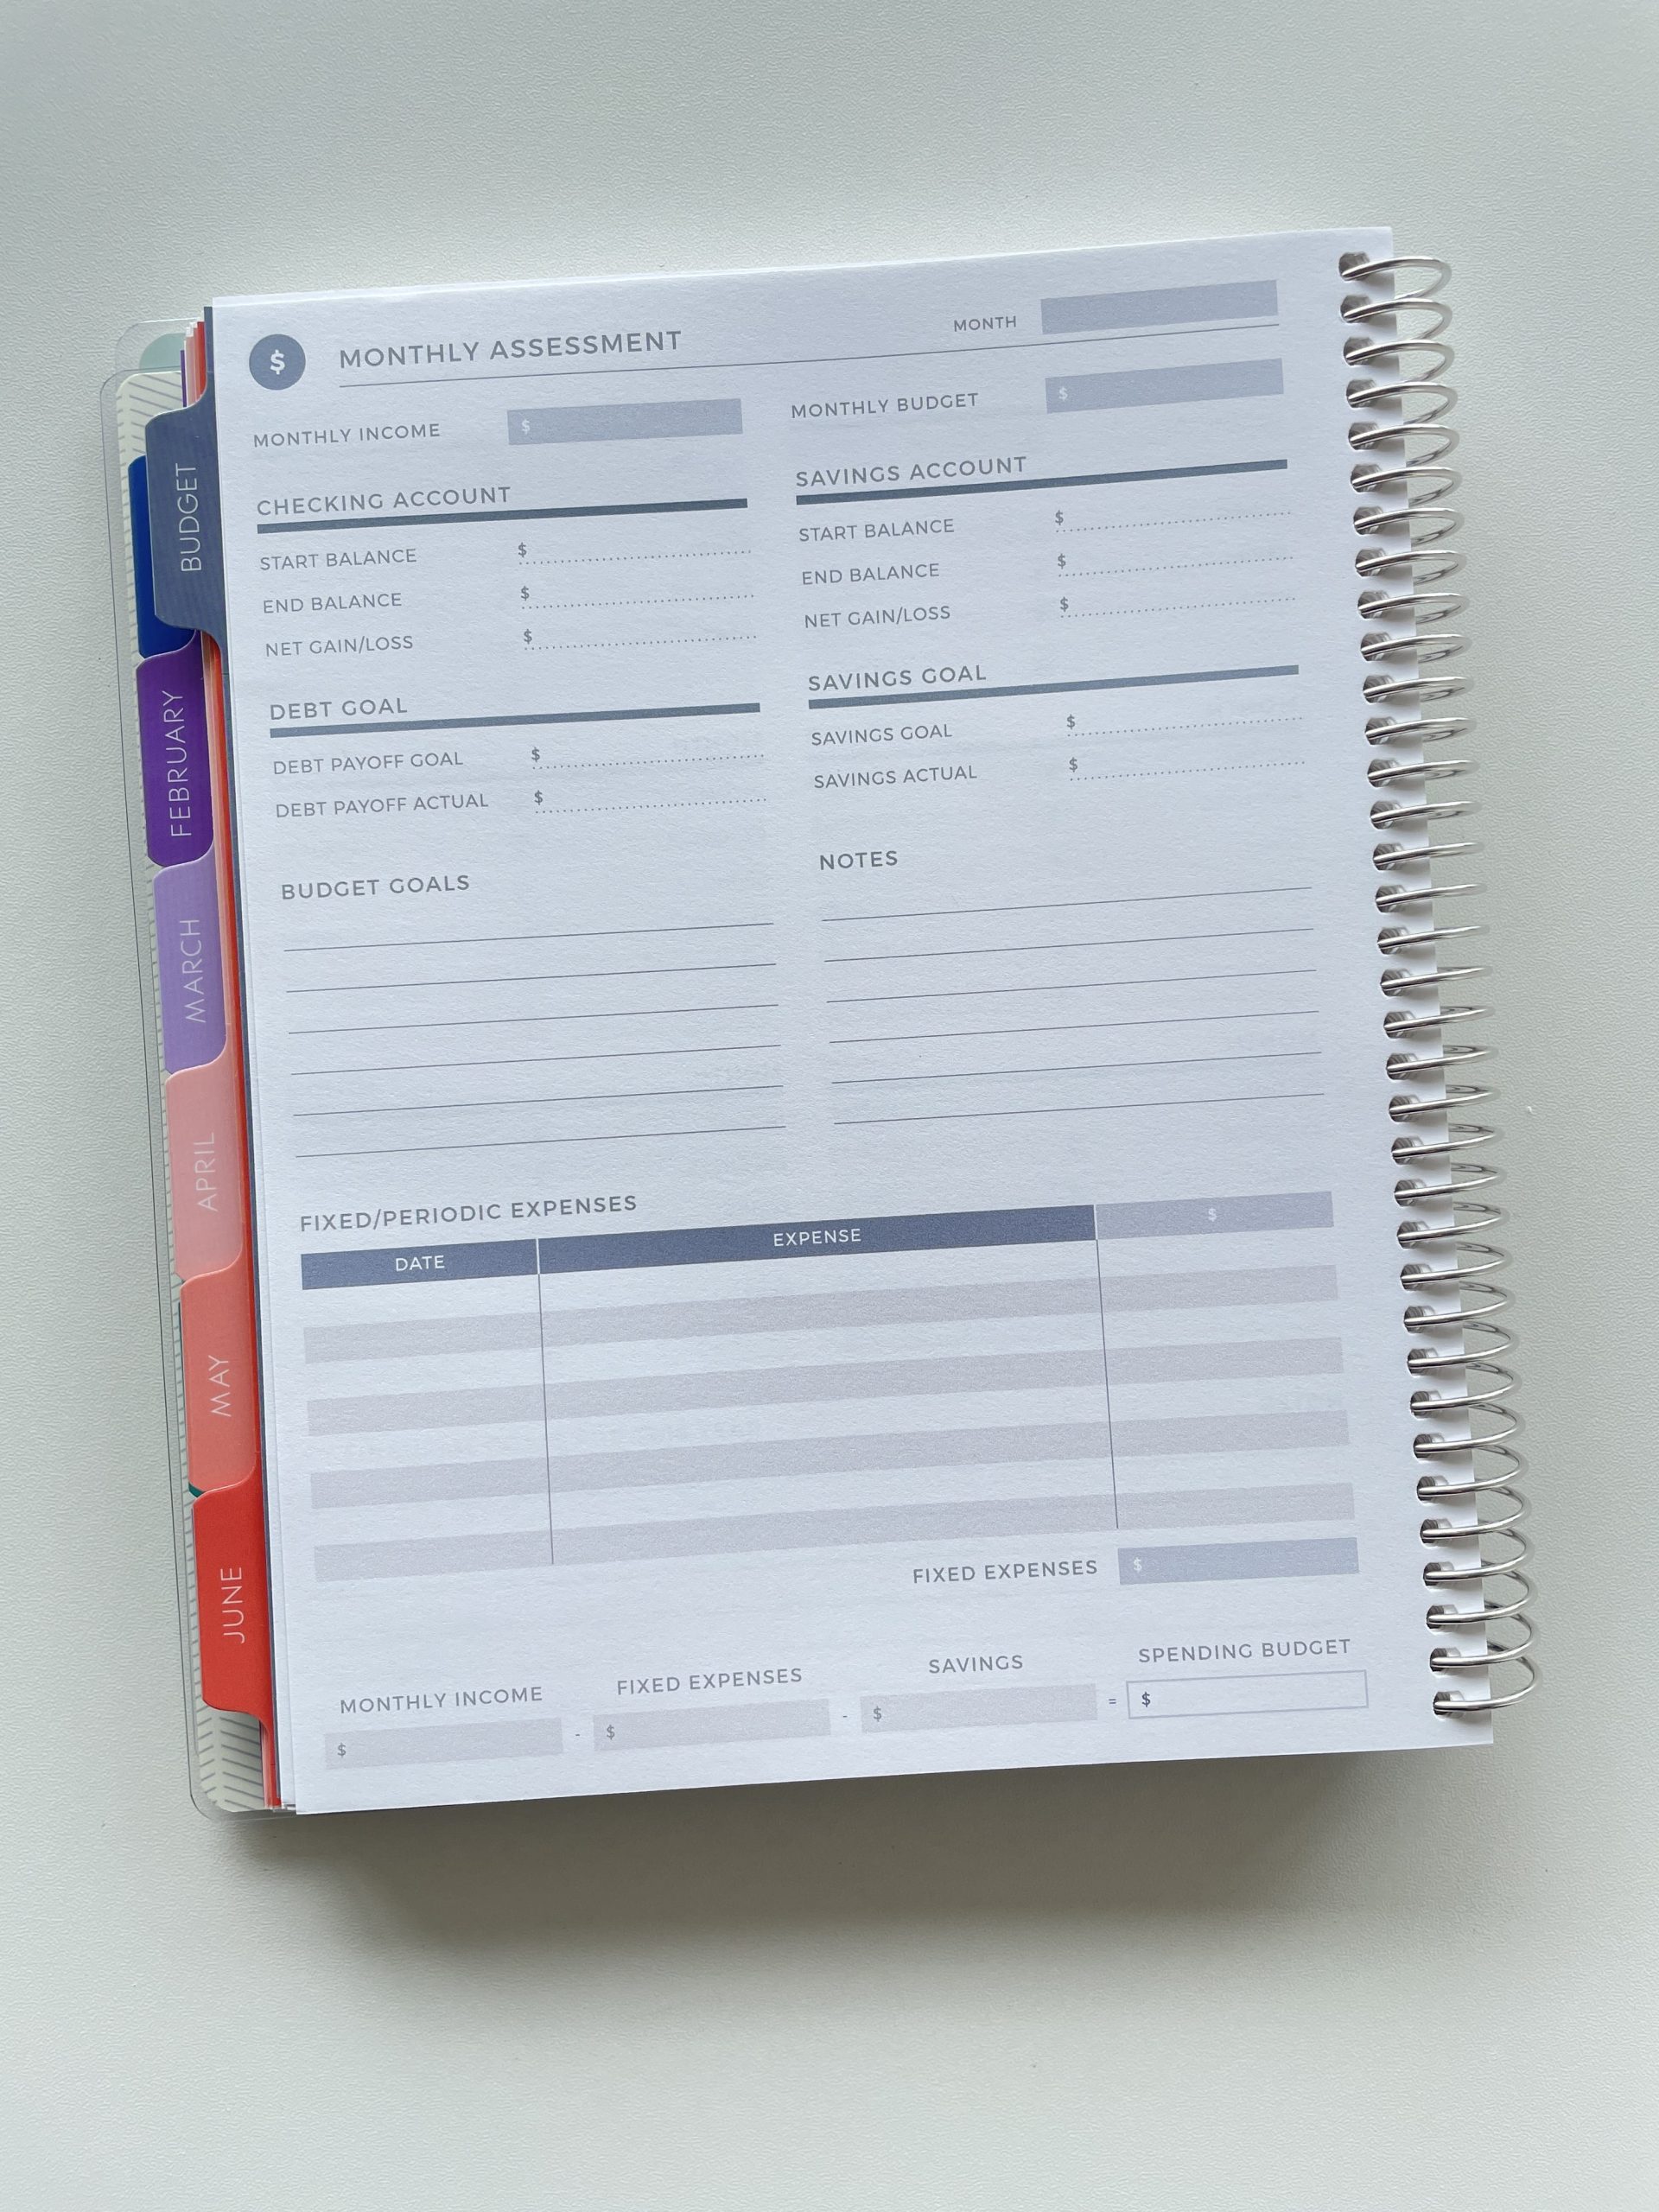 plum paper budgeting add on pages monthly spending bills payments savings income tracker versus budget planner